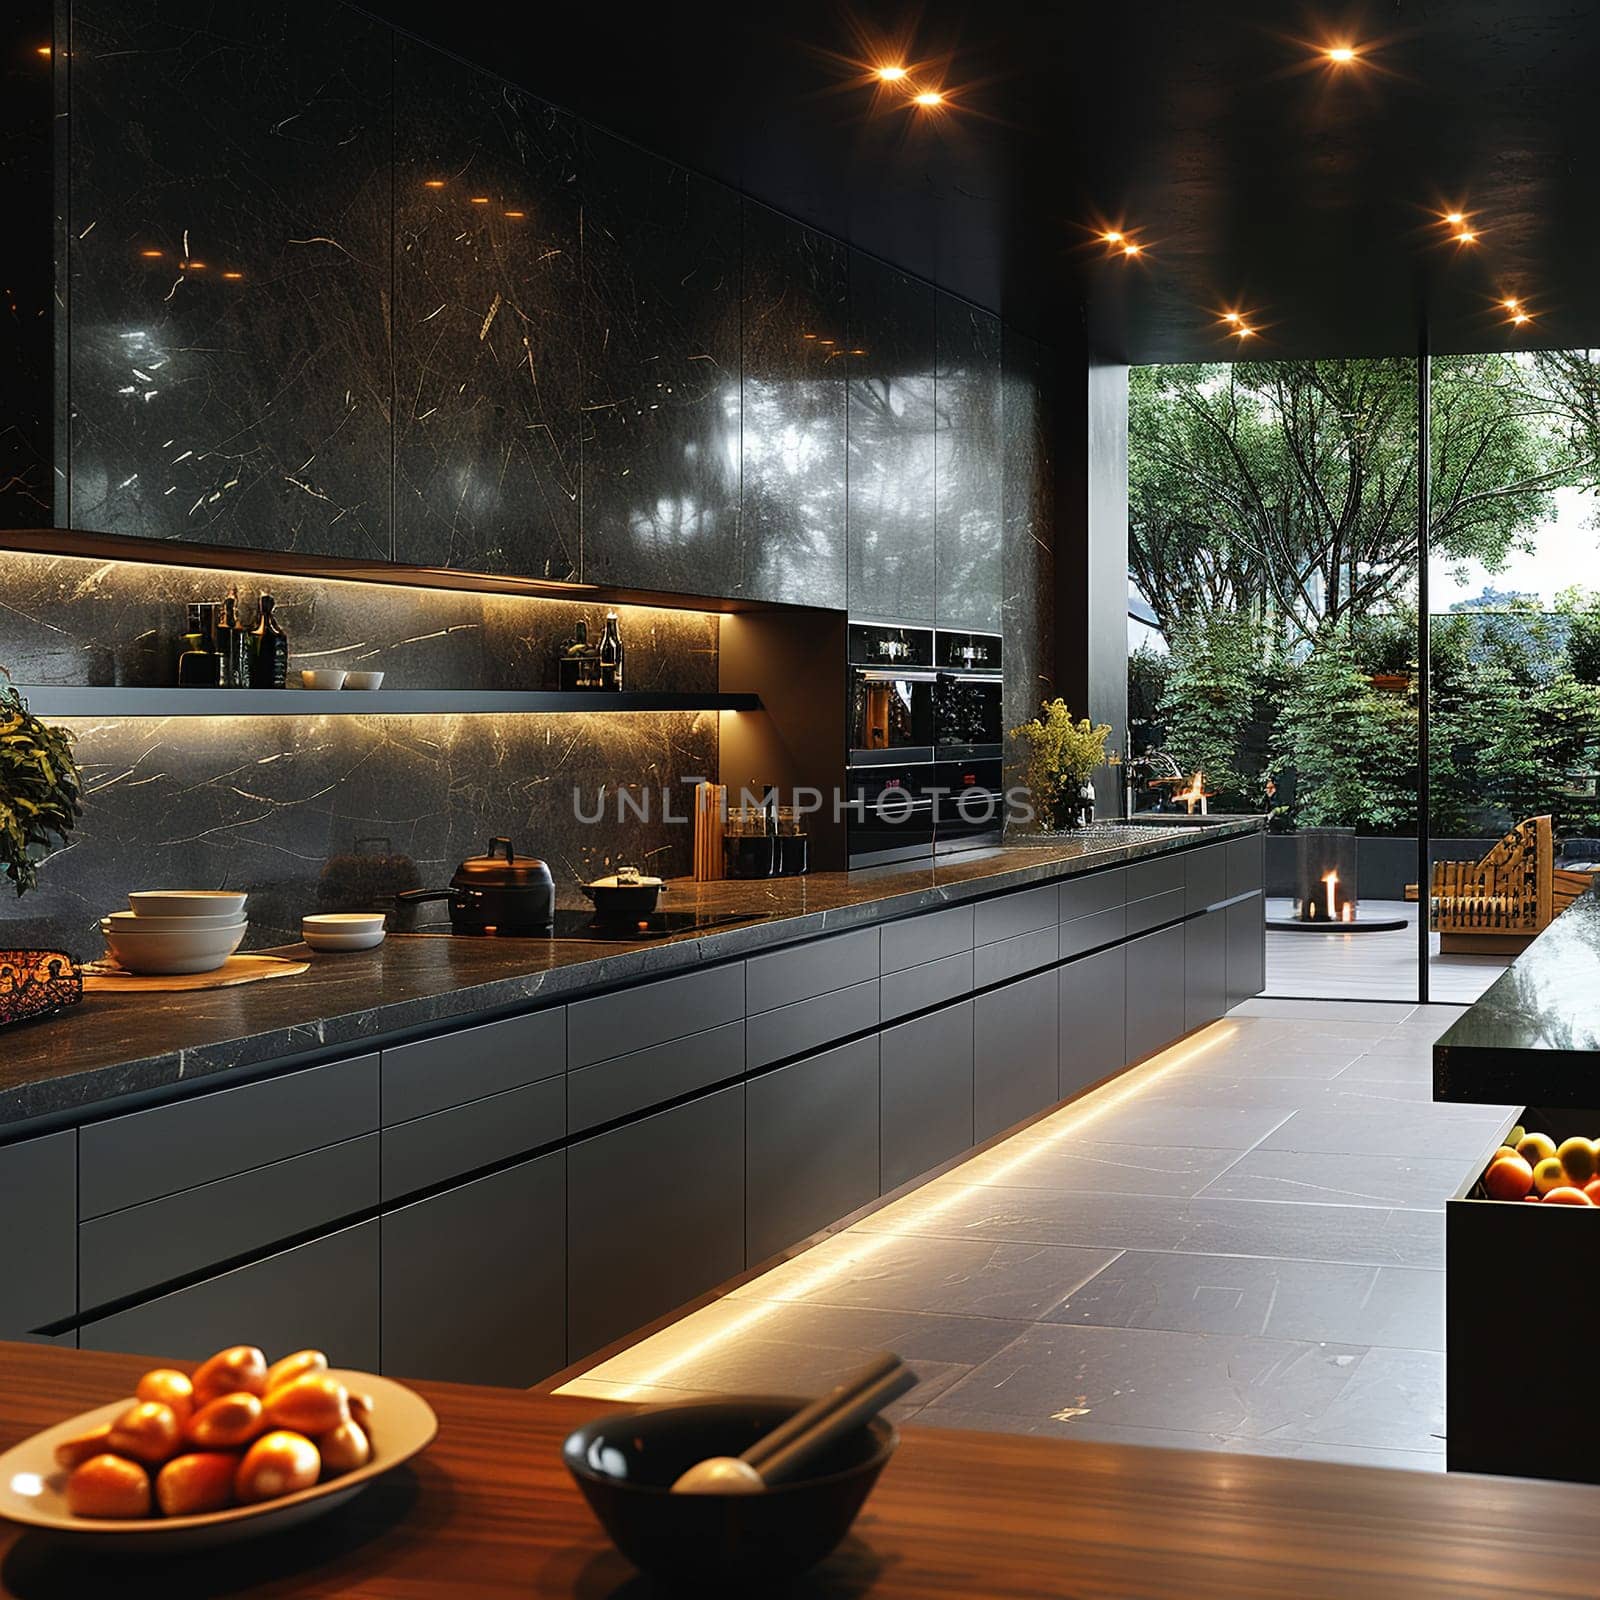 Ultra-modern kitchen with smart appliances and sleek, reflective surfacessuper detailed